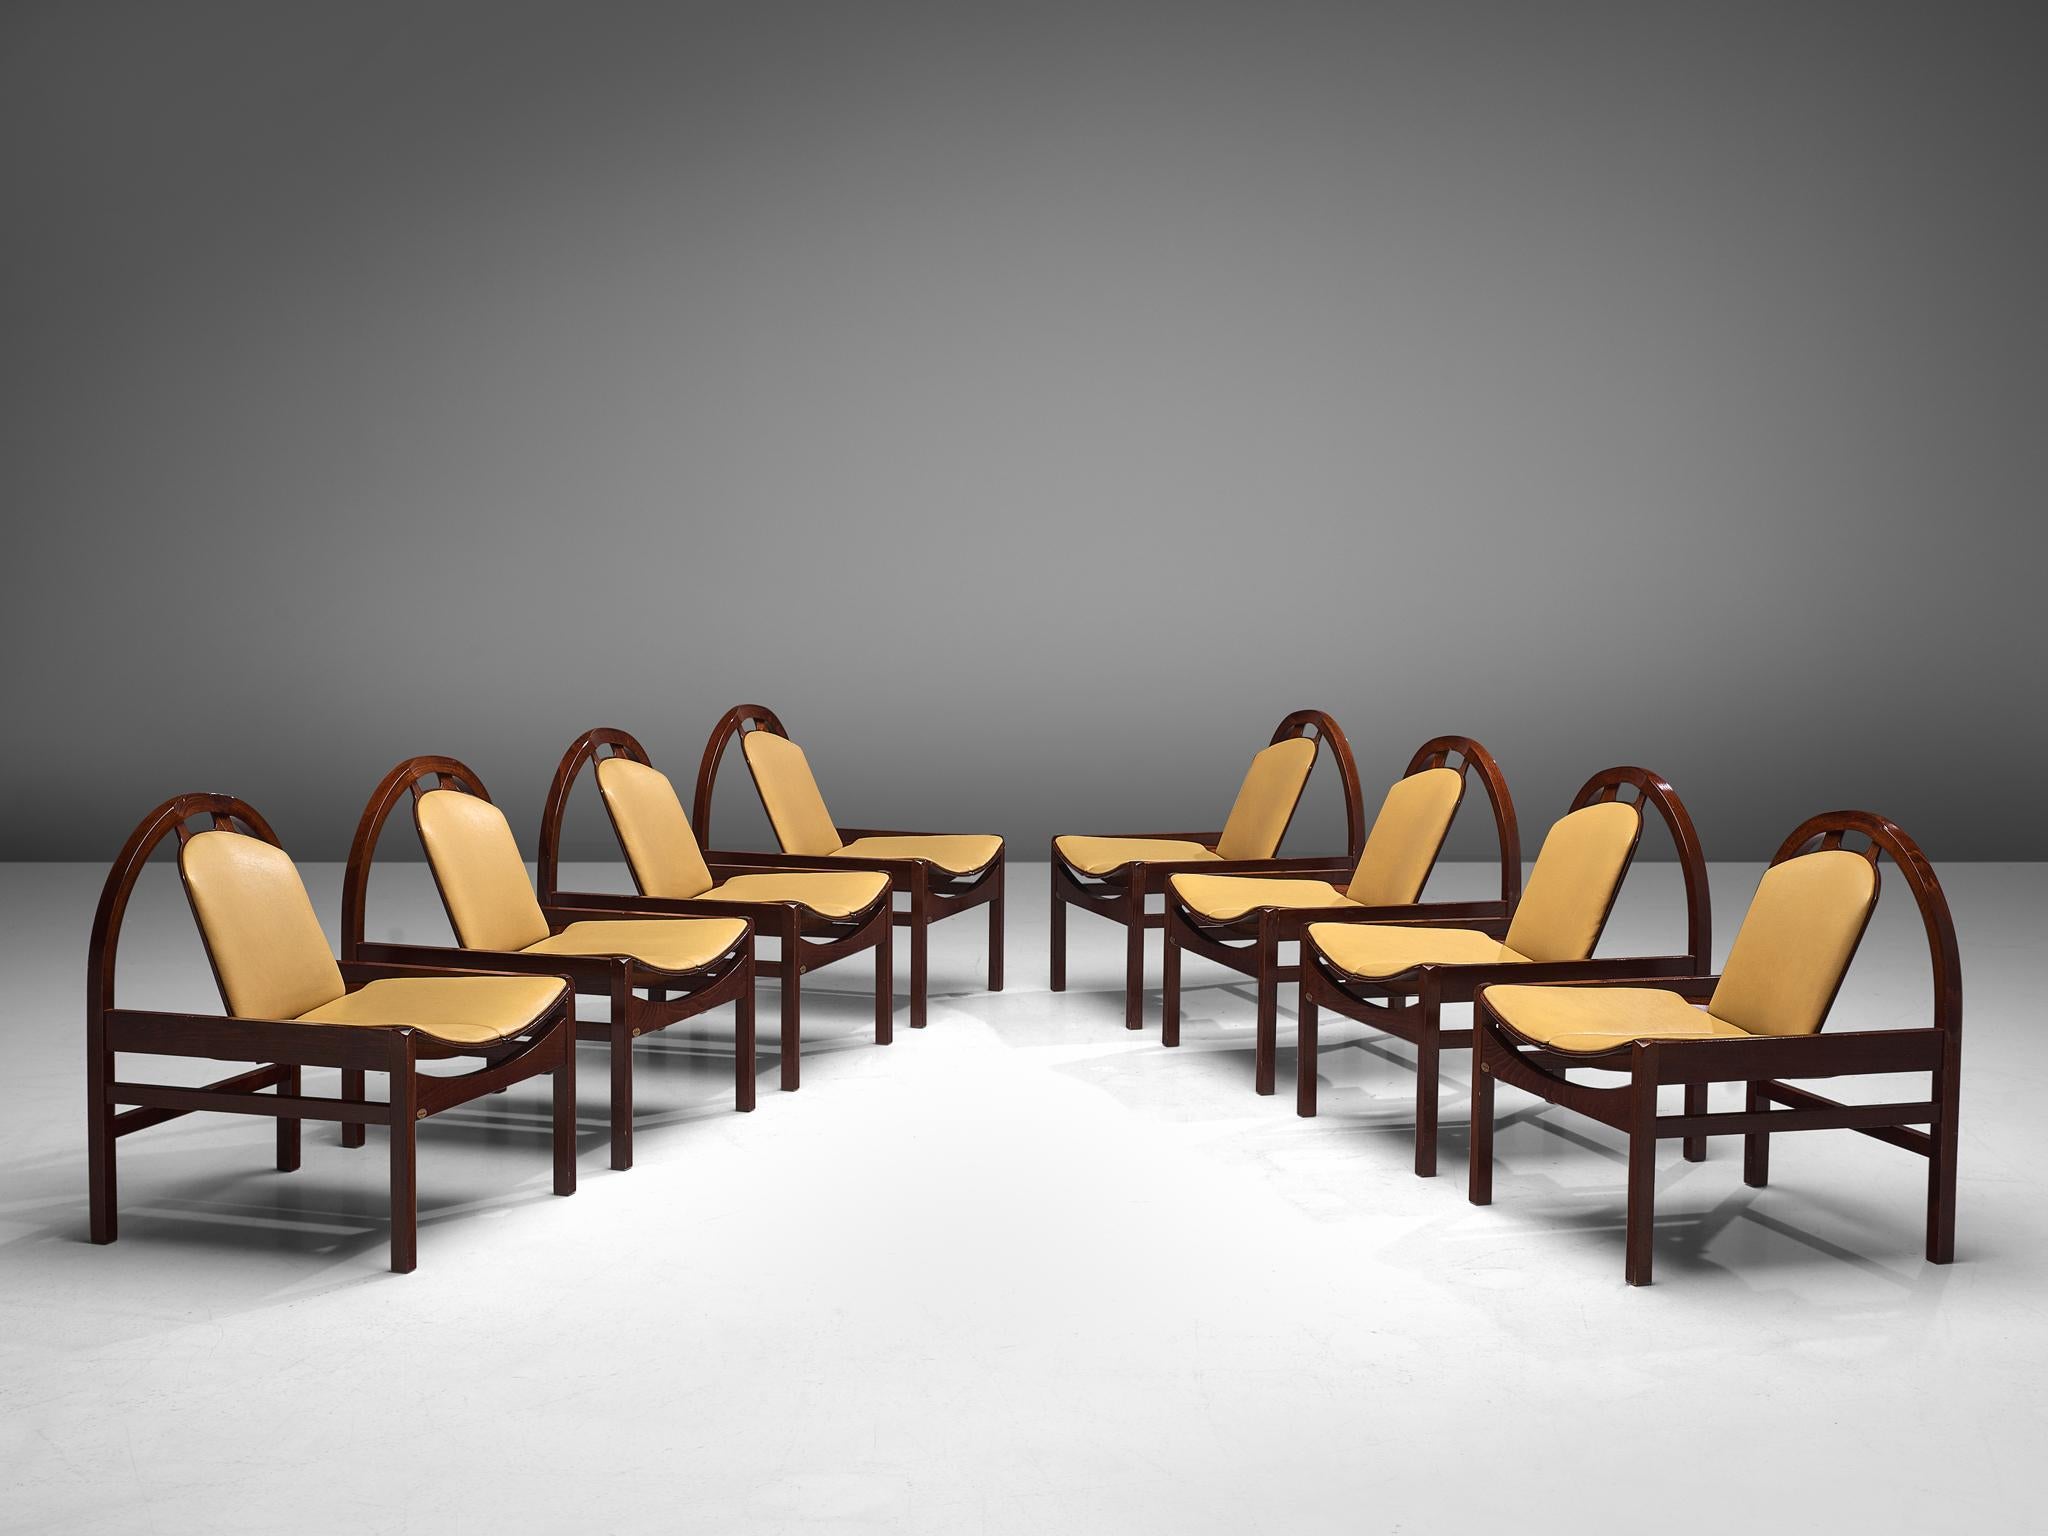 Baumann, 'Argos' easy chairs, stained beech, leather, France, 1970s

These 'Argos' lounge chairs were manufactured by Baumann in France in the 1970s. The chairs feature a round frame that supports the tilted backrest. The tilted seat is wide and low